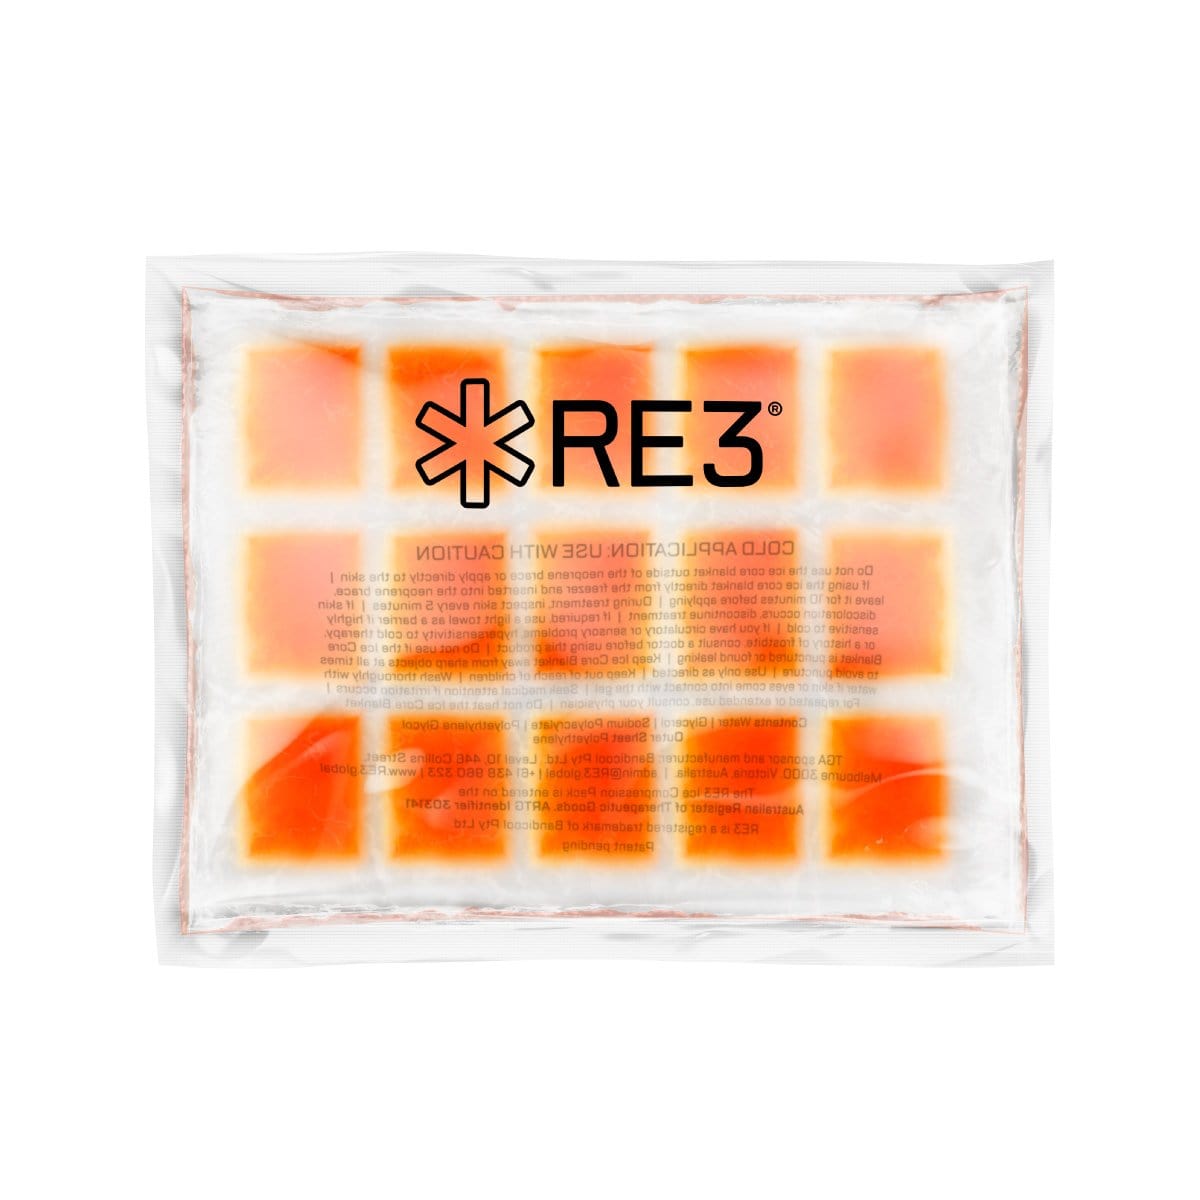 RE3 ICE CORE BLANKET - ANKLE / WRIST / ELBOW